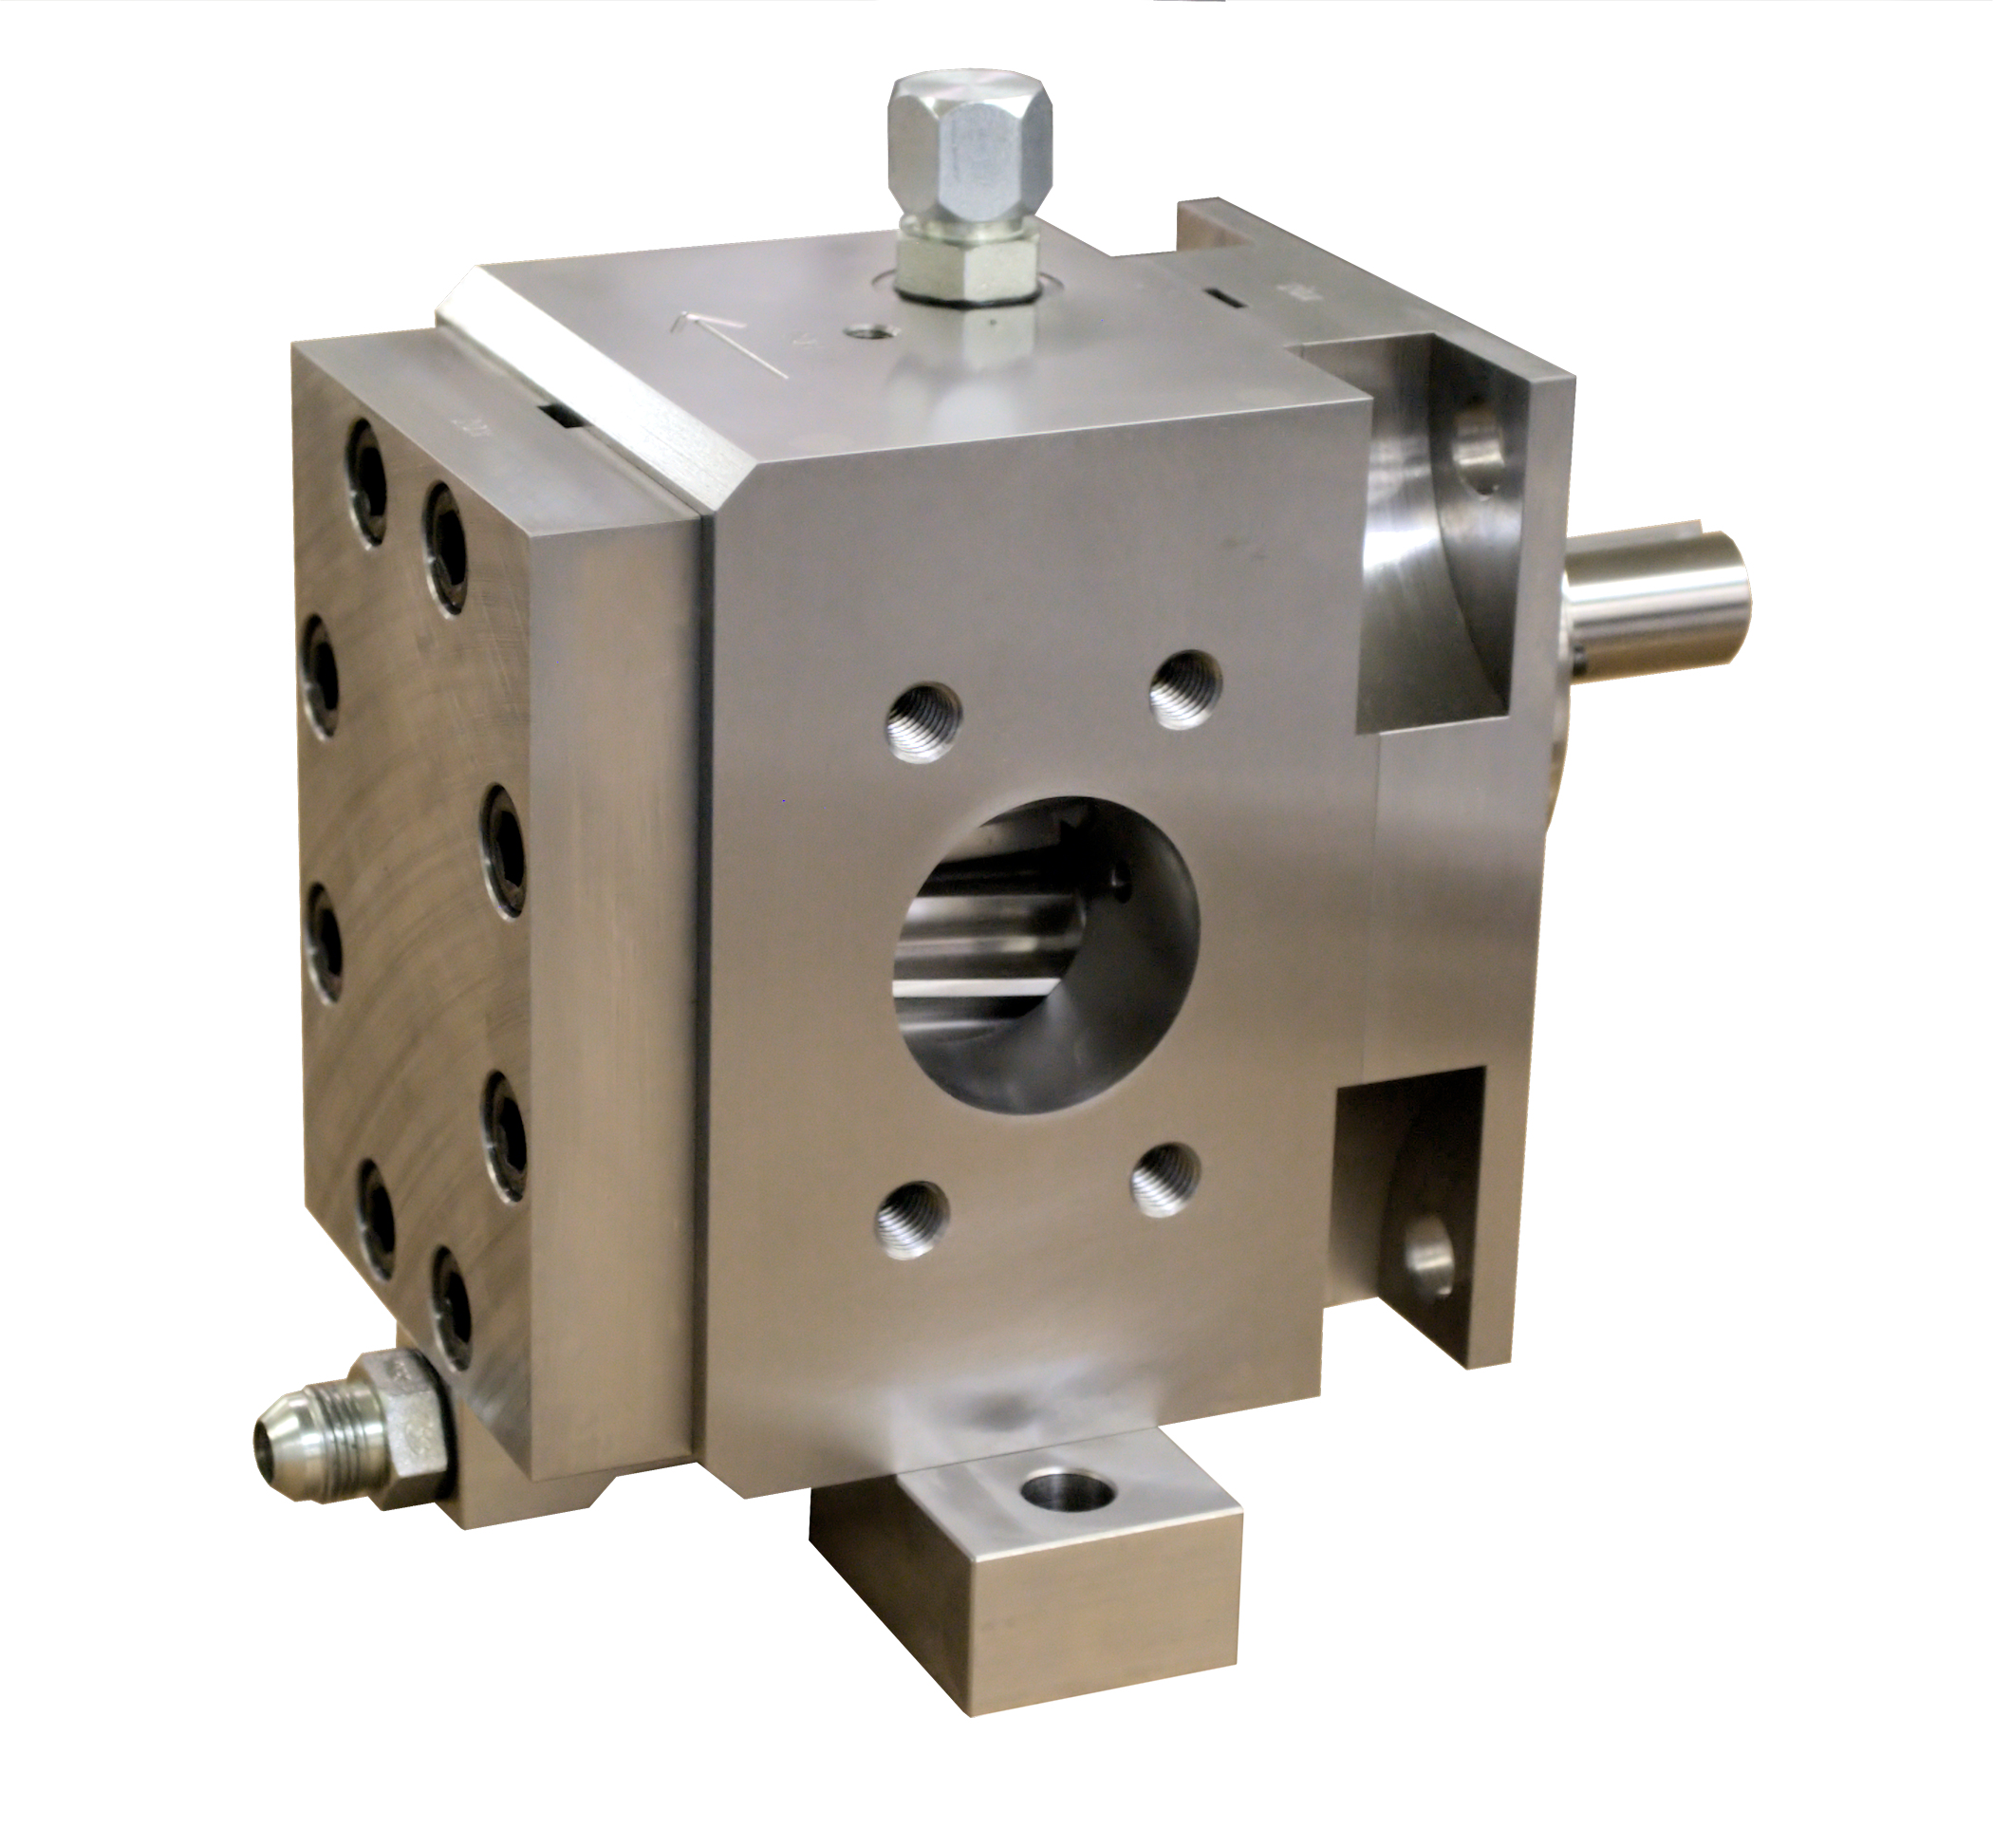 Extrusion Chemical Industrial Gear Pump (CIP)